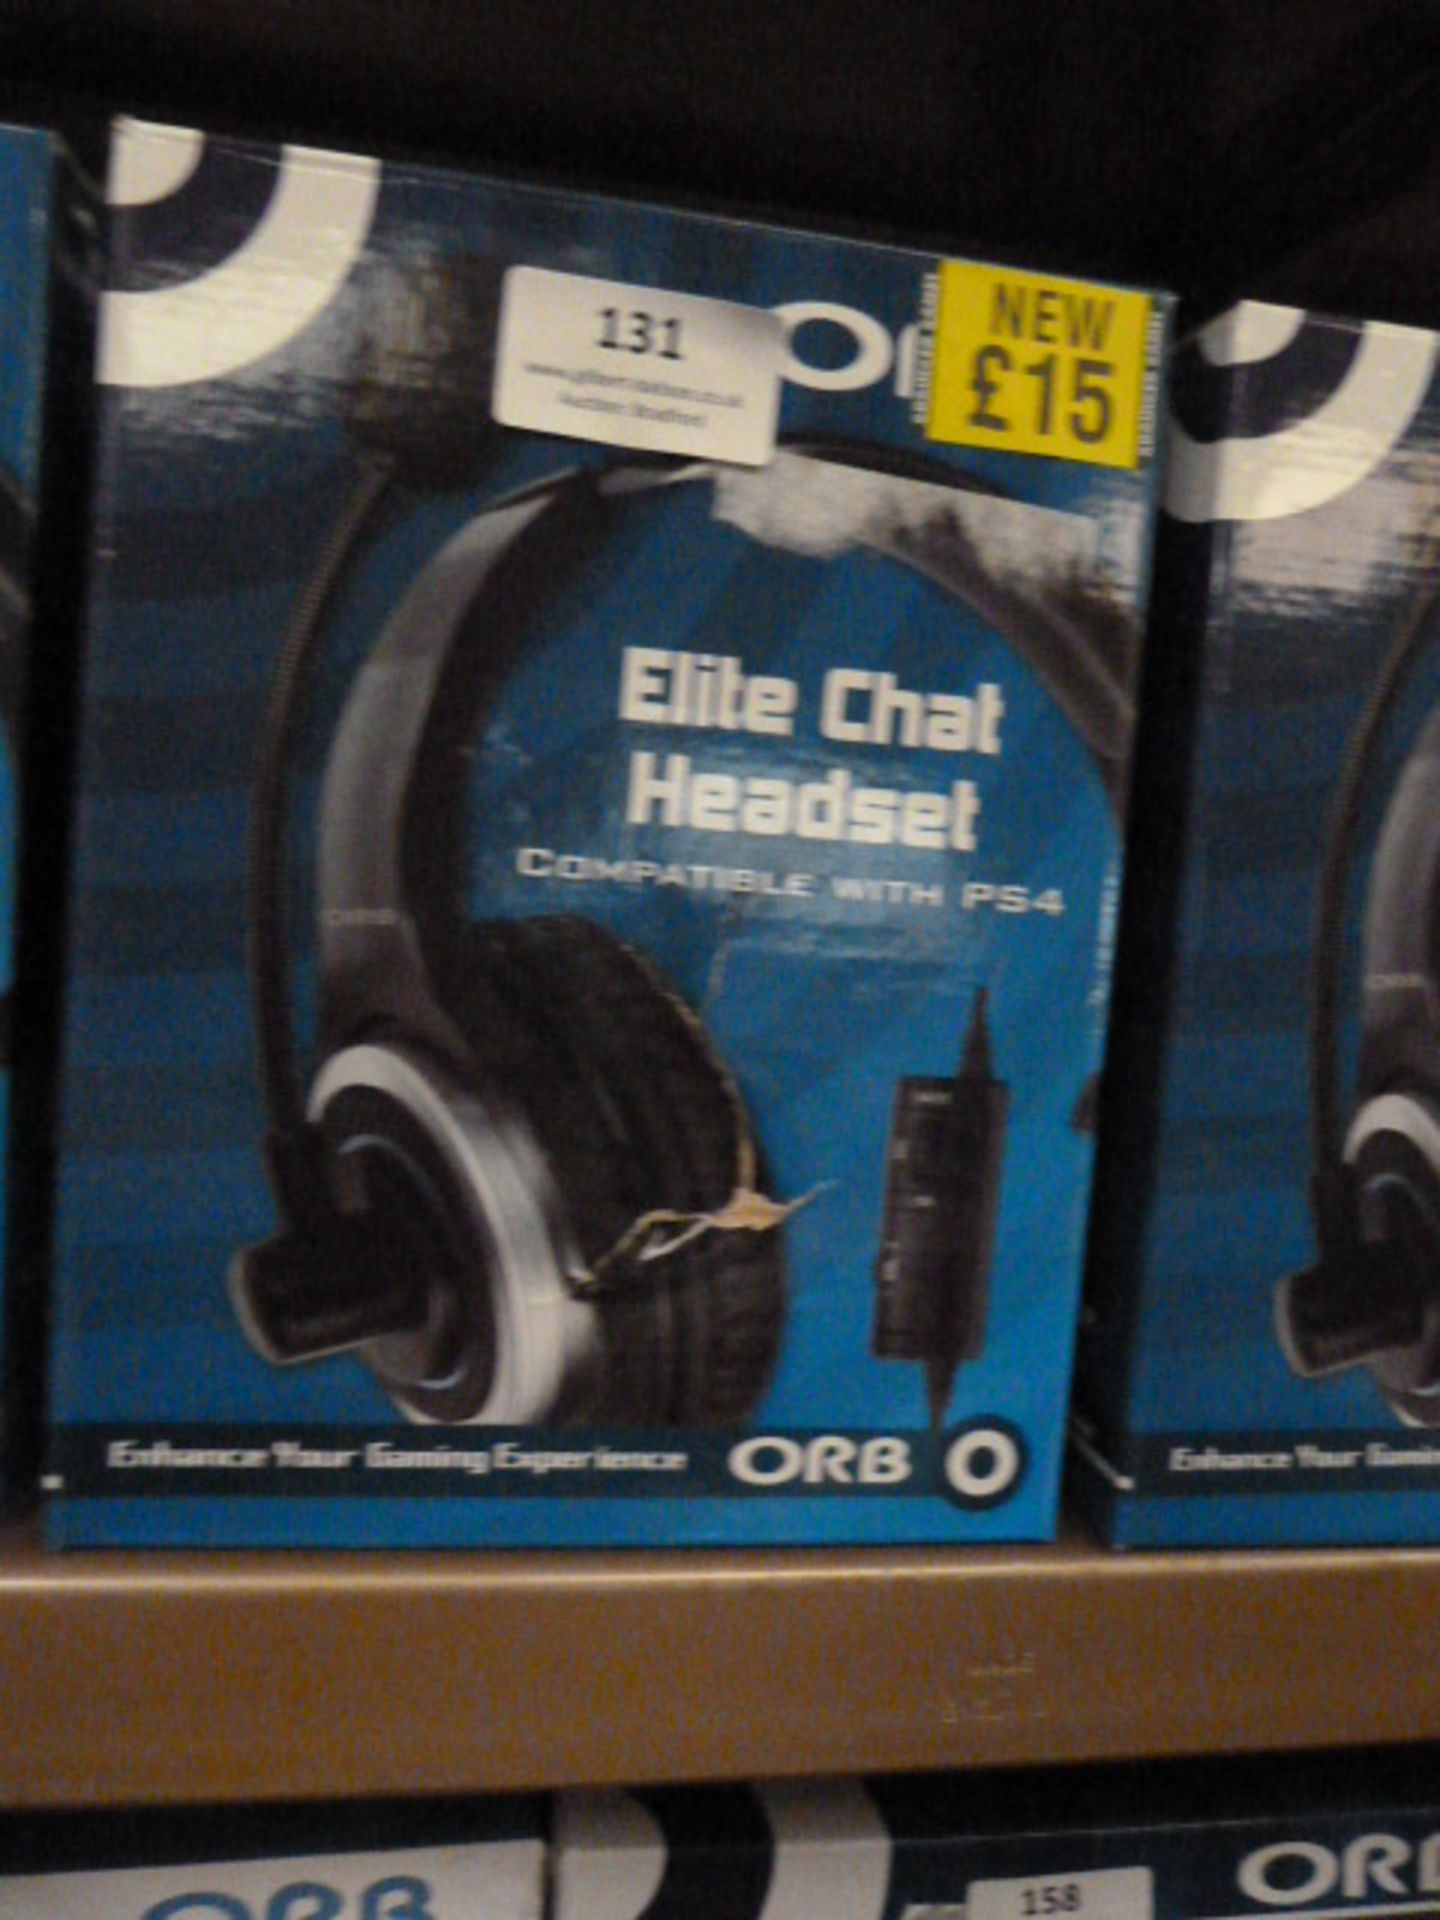 *4 Orb Elite Chat Headsets Compatible with PS4